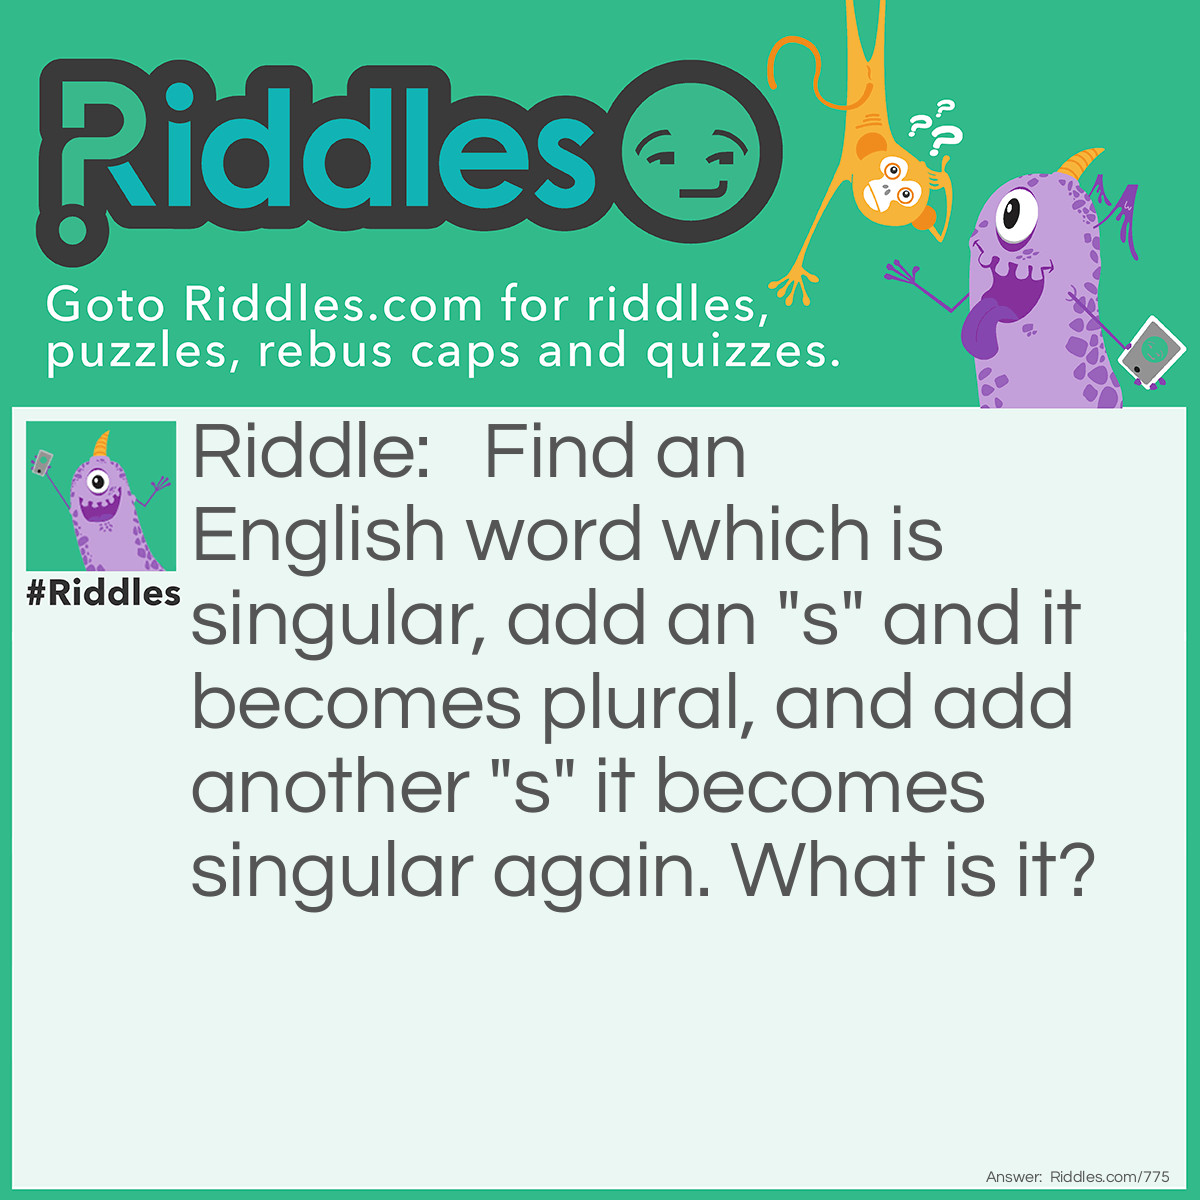 Riddle: Find an English word which is singular, add an "s" and it becomes plural, and add another "s" it becomes singular again. What is it? Answer: There are actually 3 correct answers: Caress. Princess. Brass.